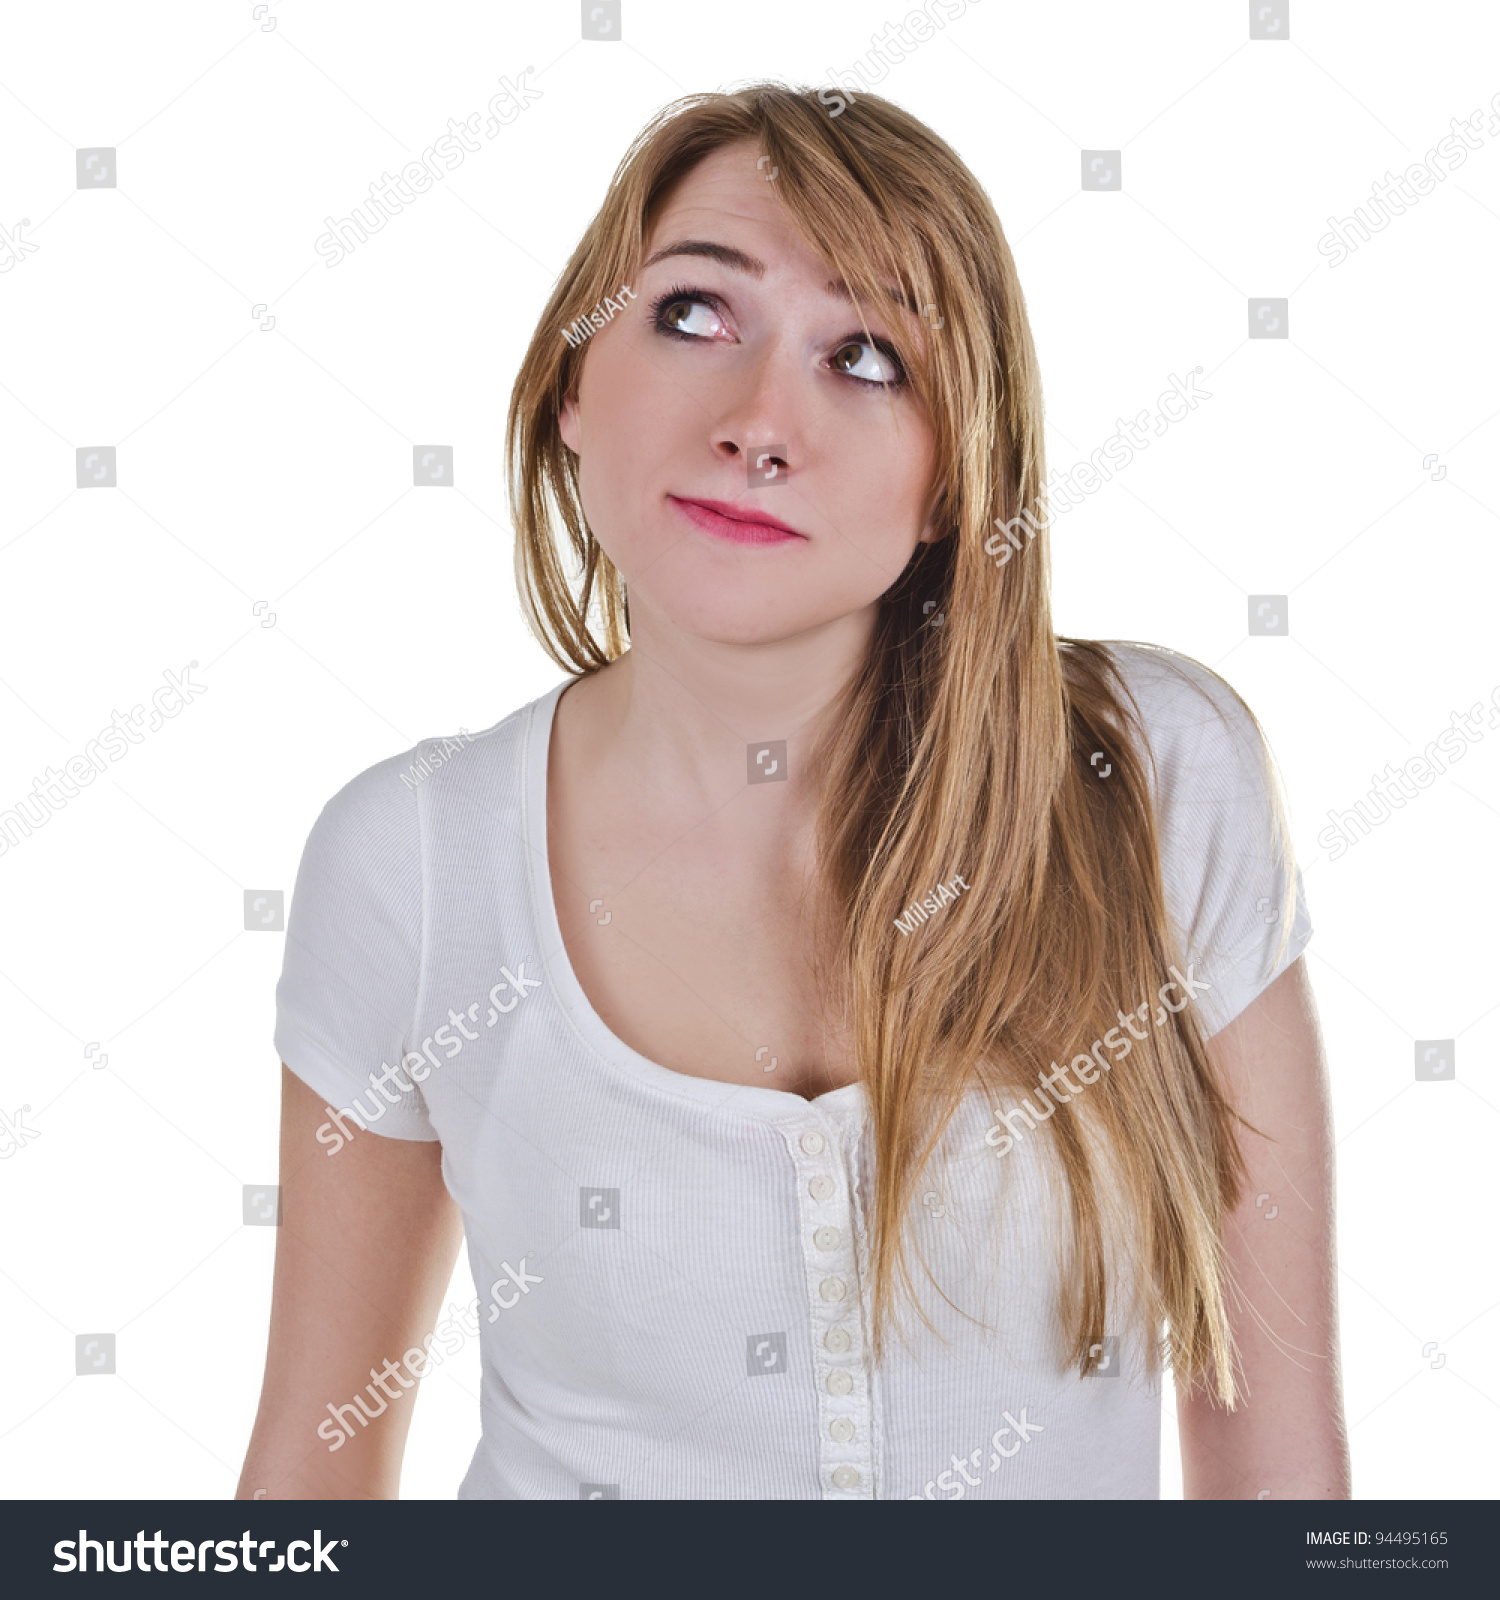 Young Woman Looking Up-Right With Expression As She Is Satisfied About ...